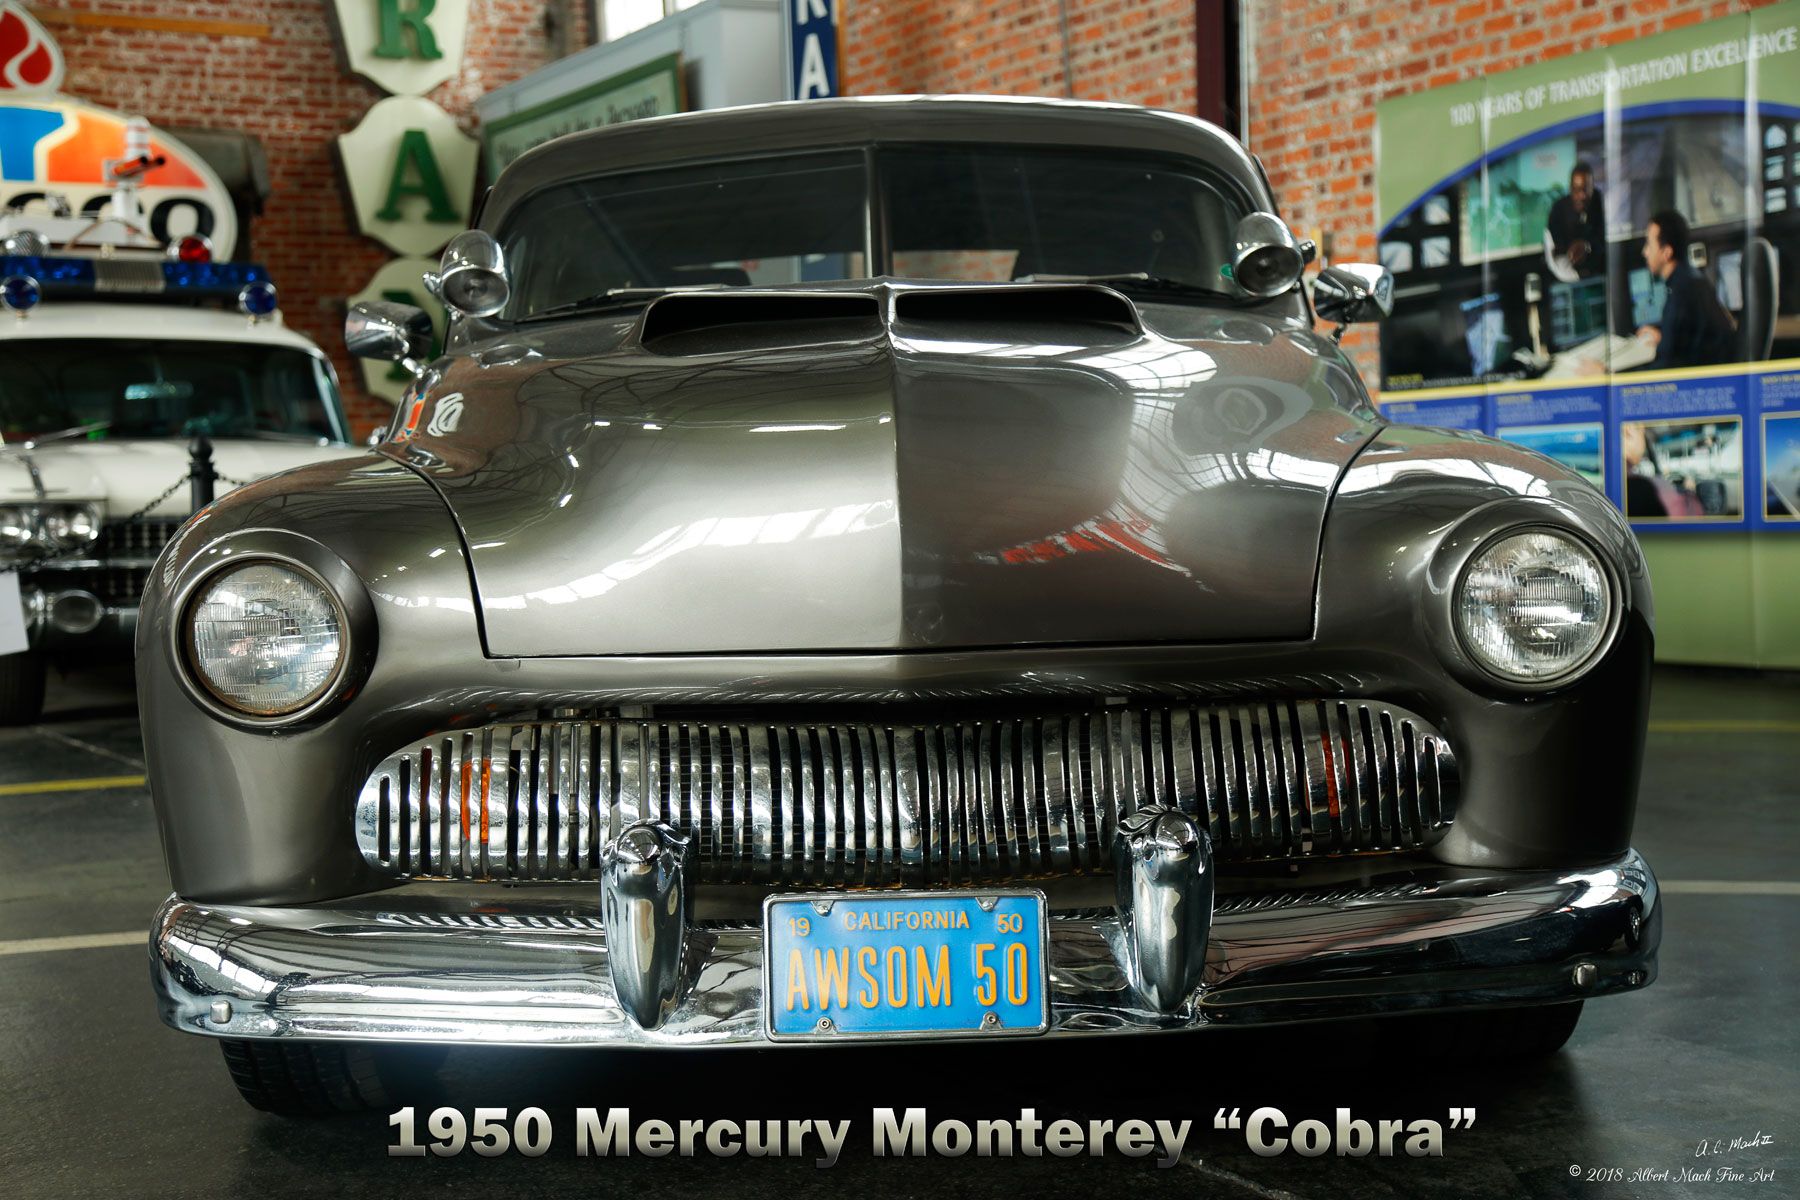 Head-on view of the 1950 Mercury Monterey used in the Cobra movie, which starred Sylvester Stallone.